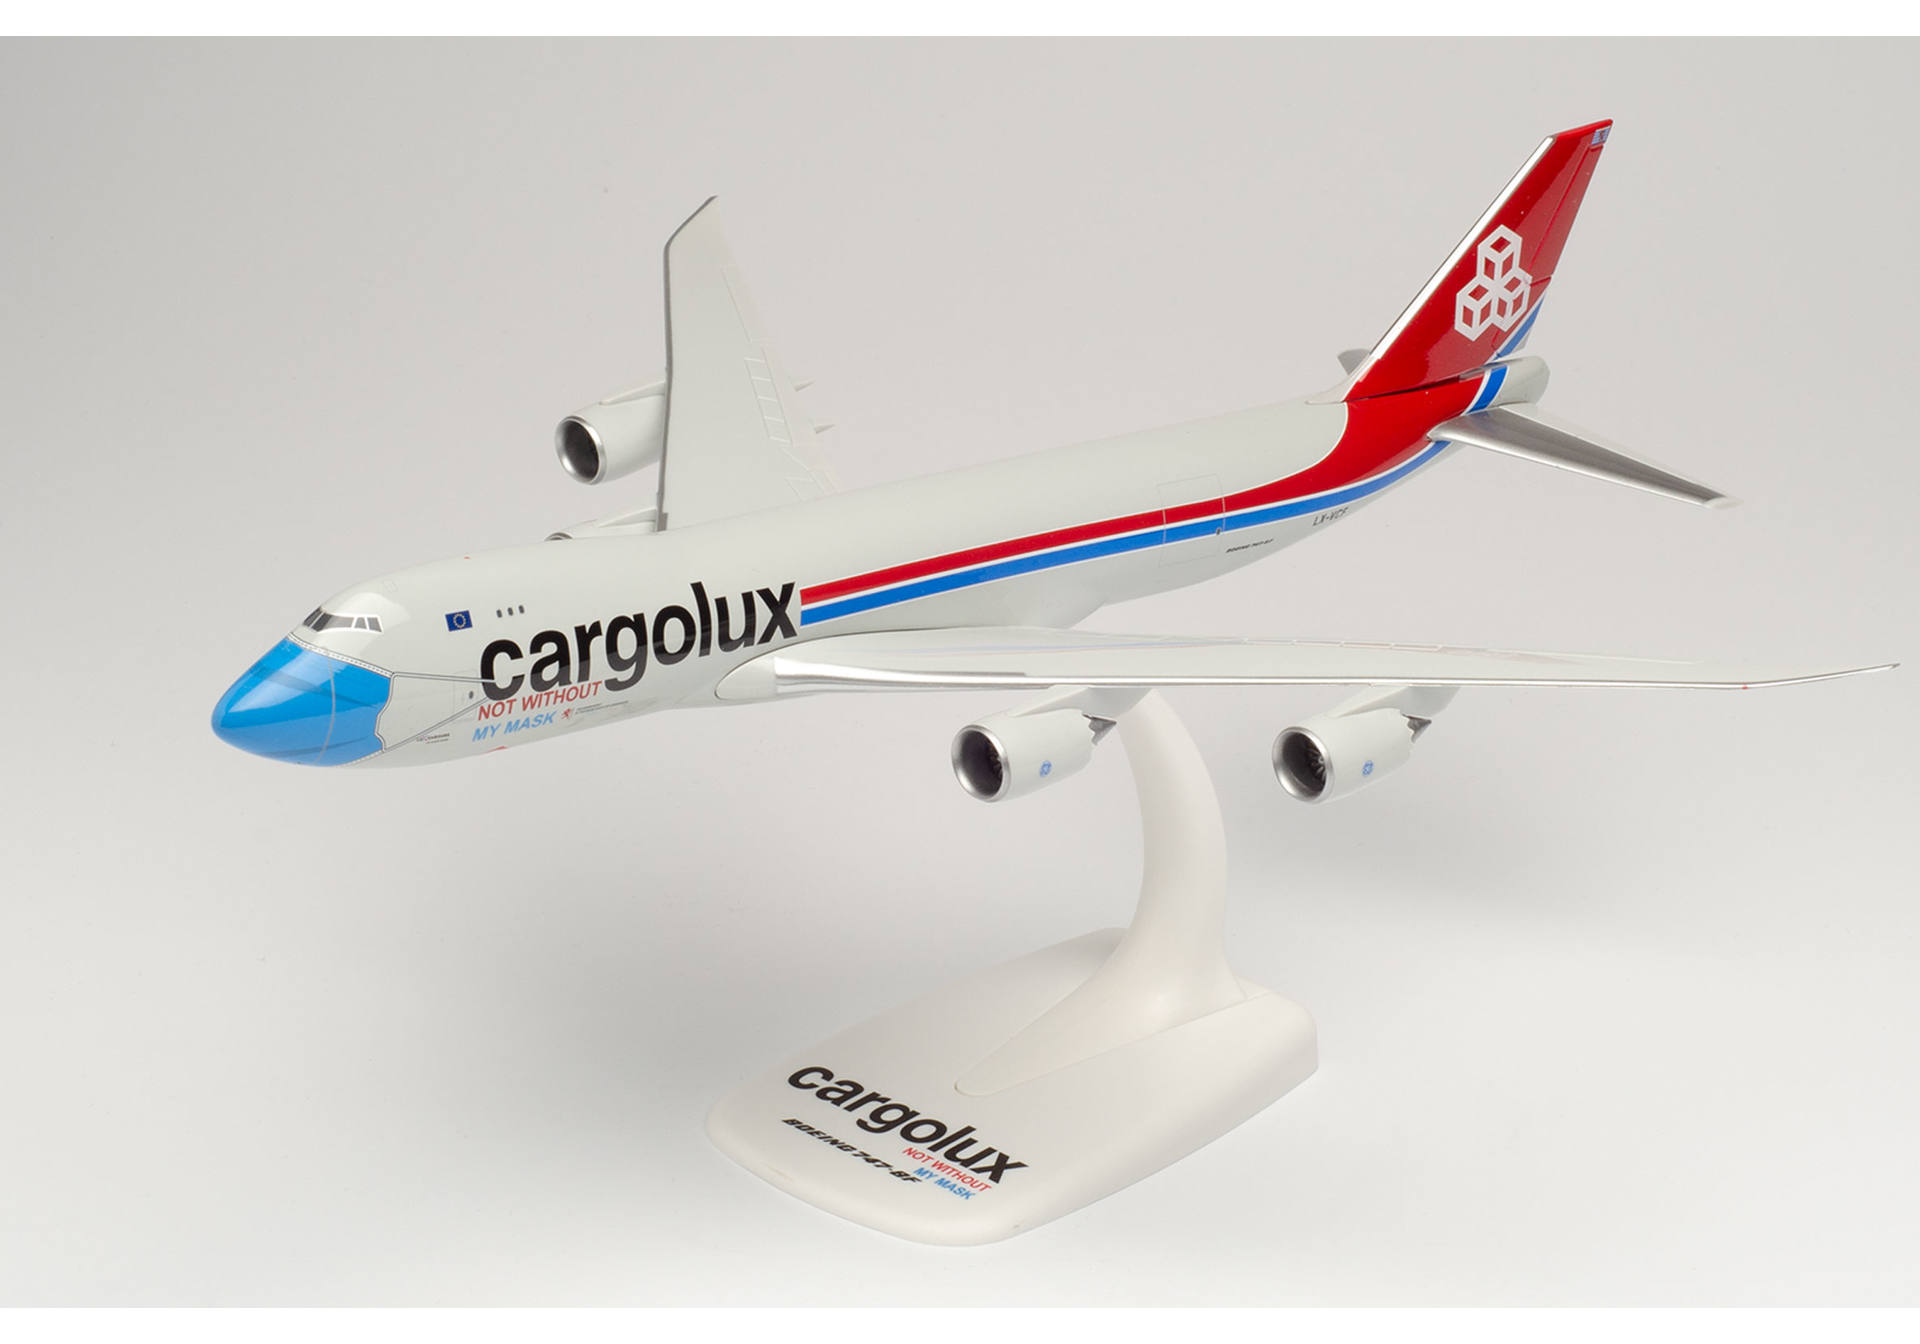 Cargolux Boeing 747-8F “Not Without My Mask” – LX-VCF